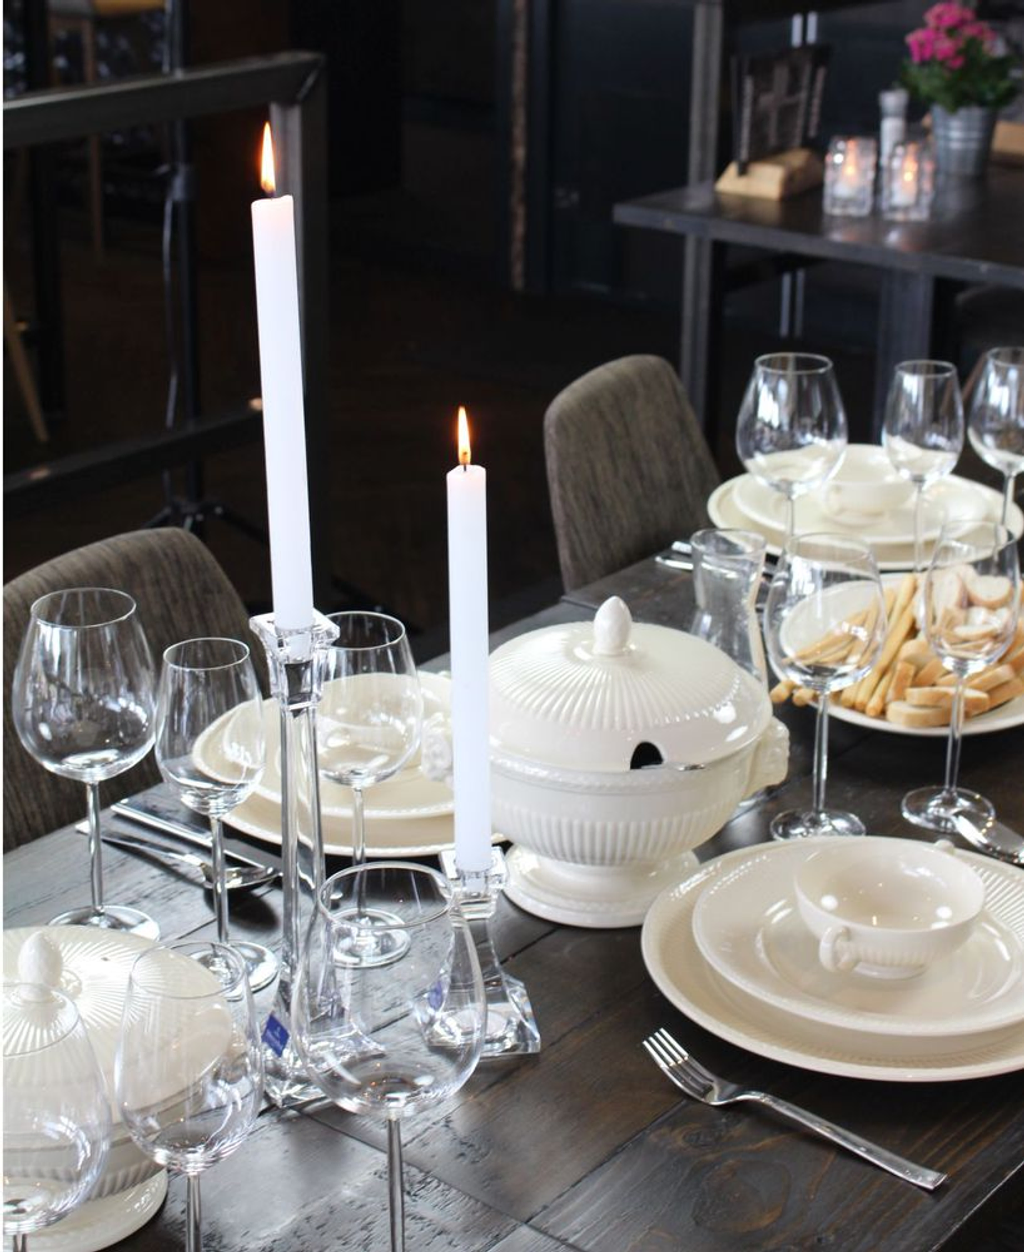 Chic fancy dinner set for 6 persons including cutlery, plates and table cloth in a nice dinner setting. Rent from BIYU.